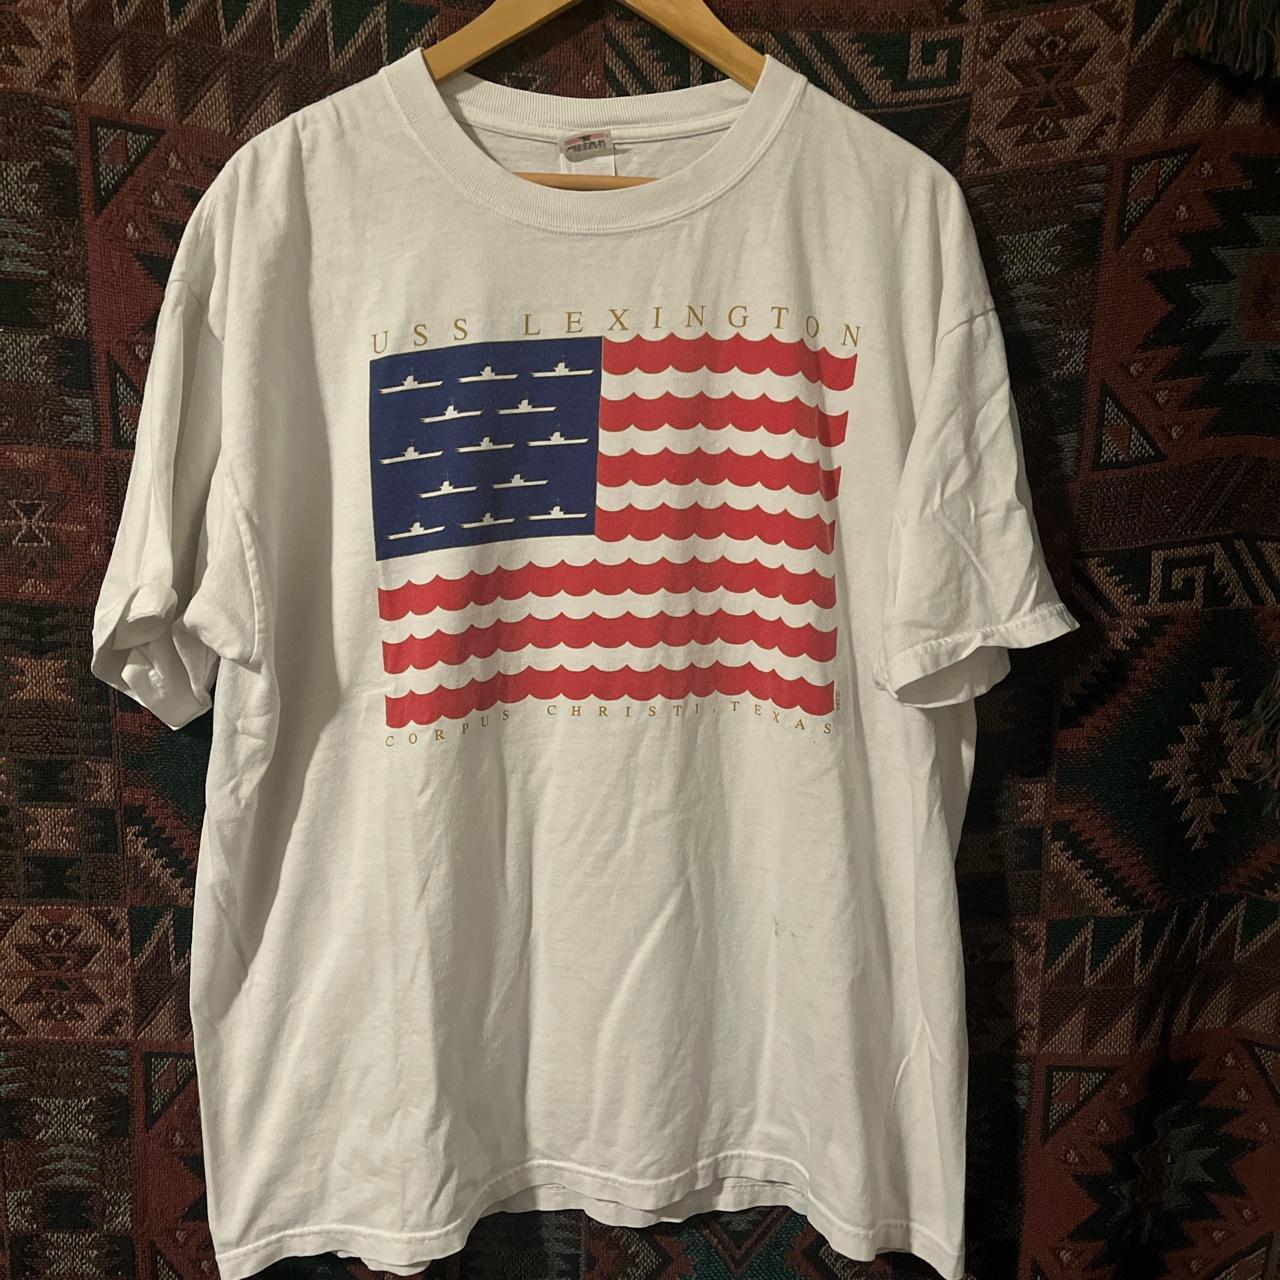 Men's White and Blue T-shirt